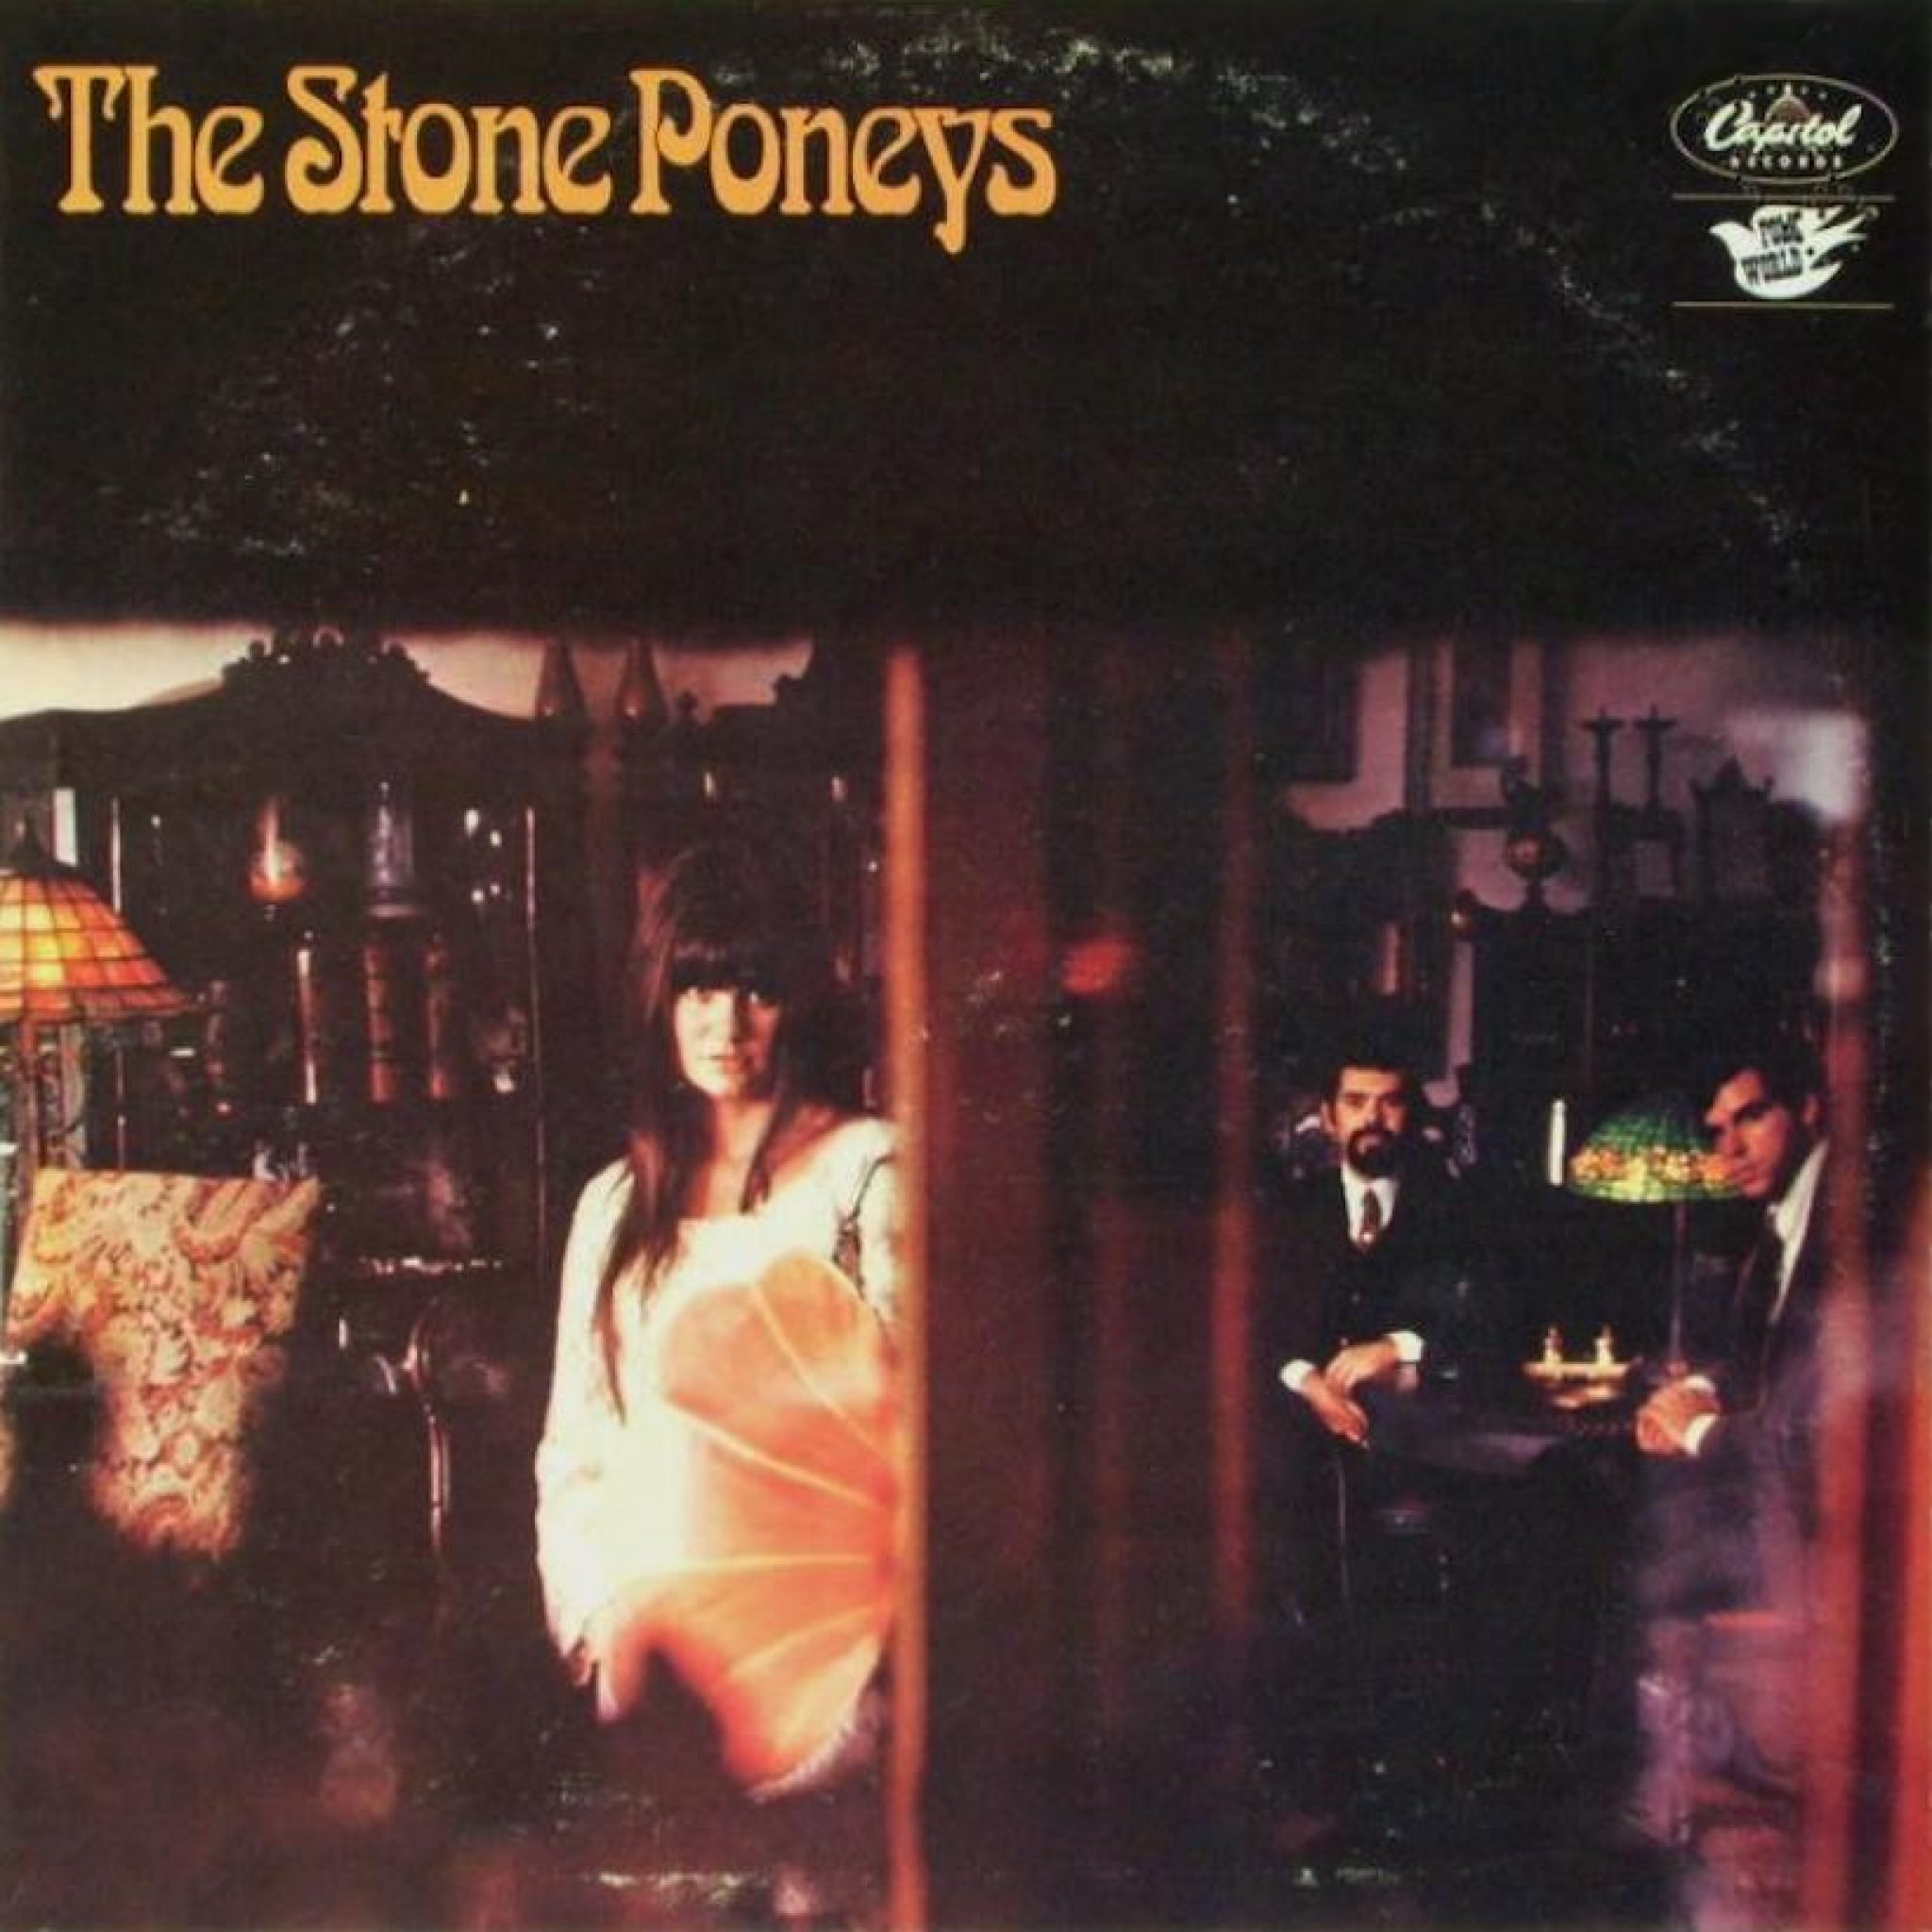 'The Stone Poneys' The Early FolkRock Adventures Of Linda Ronstadt